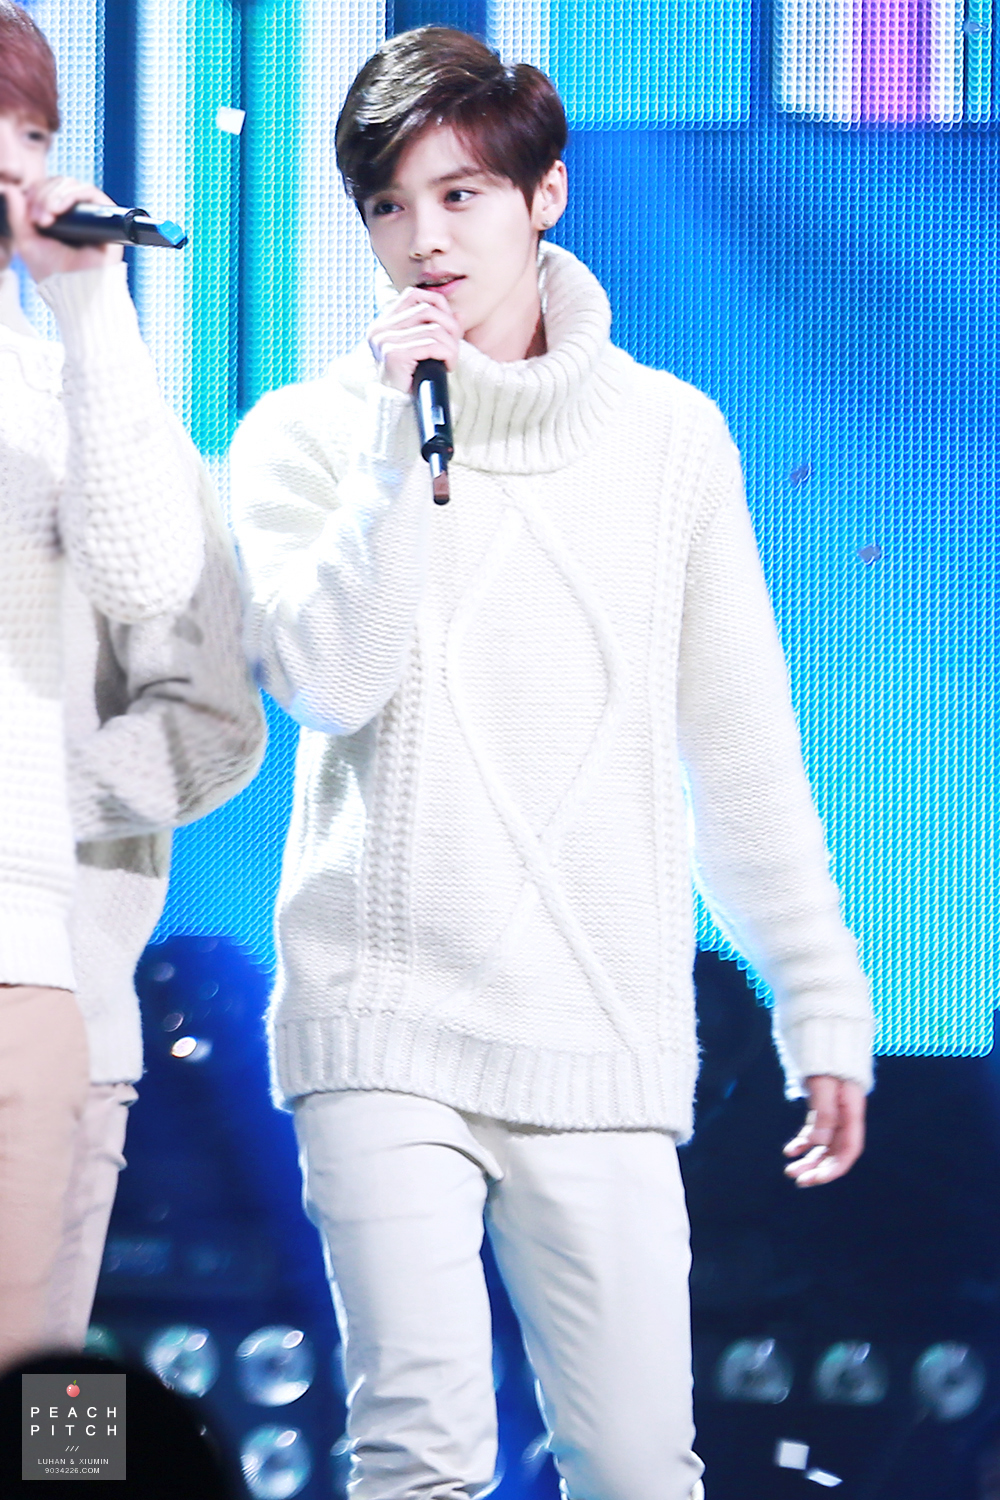 [FANTAKEN] 131215 SBS Inkigayo - Miracle in December [6P] 25040E4F52AD9DC00AD76B